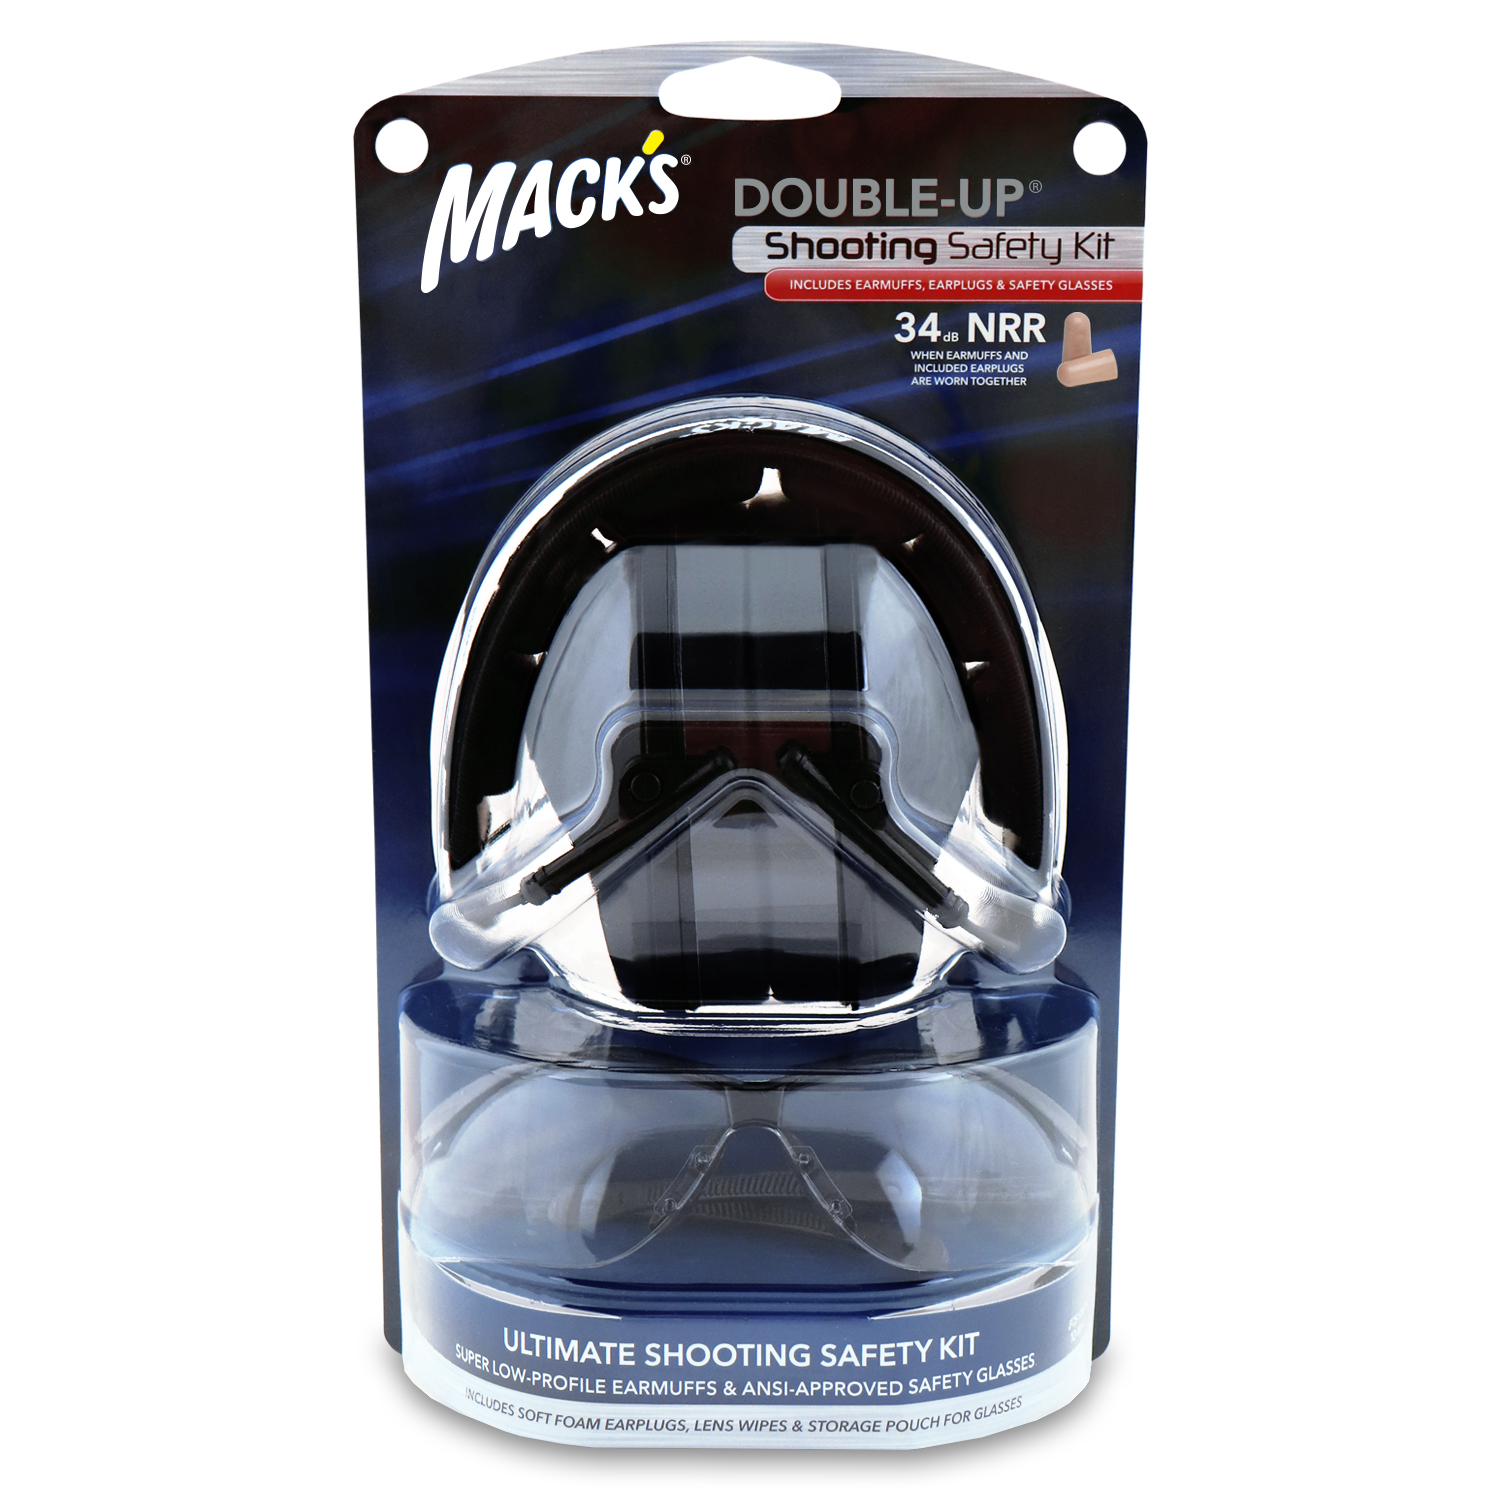 4416 - Macks Shooting Maximum Protection Double Up Ear muffs Safety Kit with ear plugs to protect your ears from loud noises